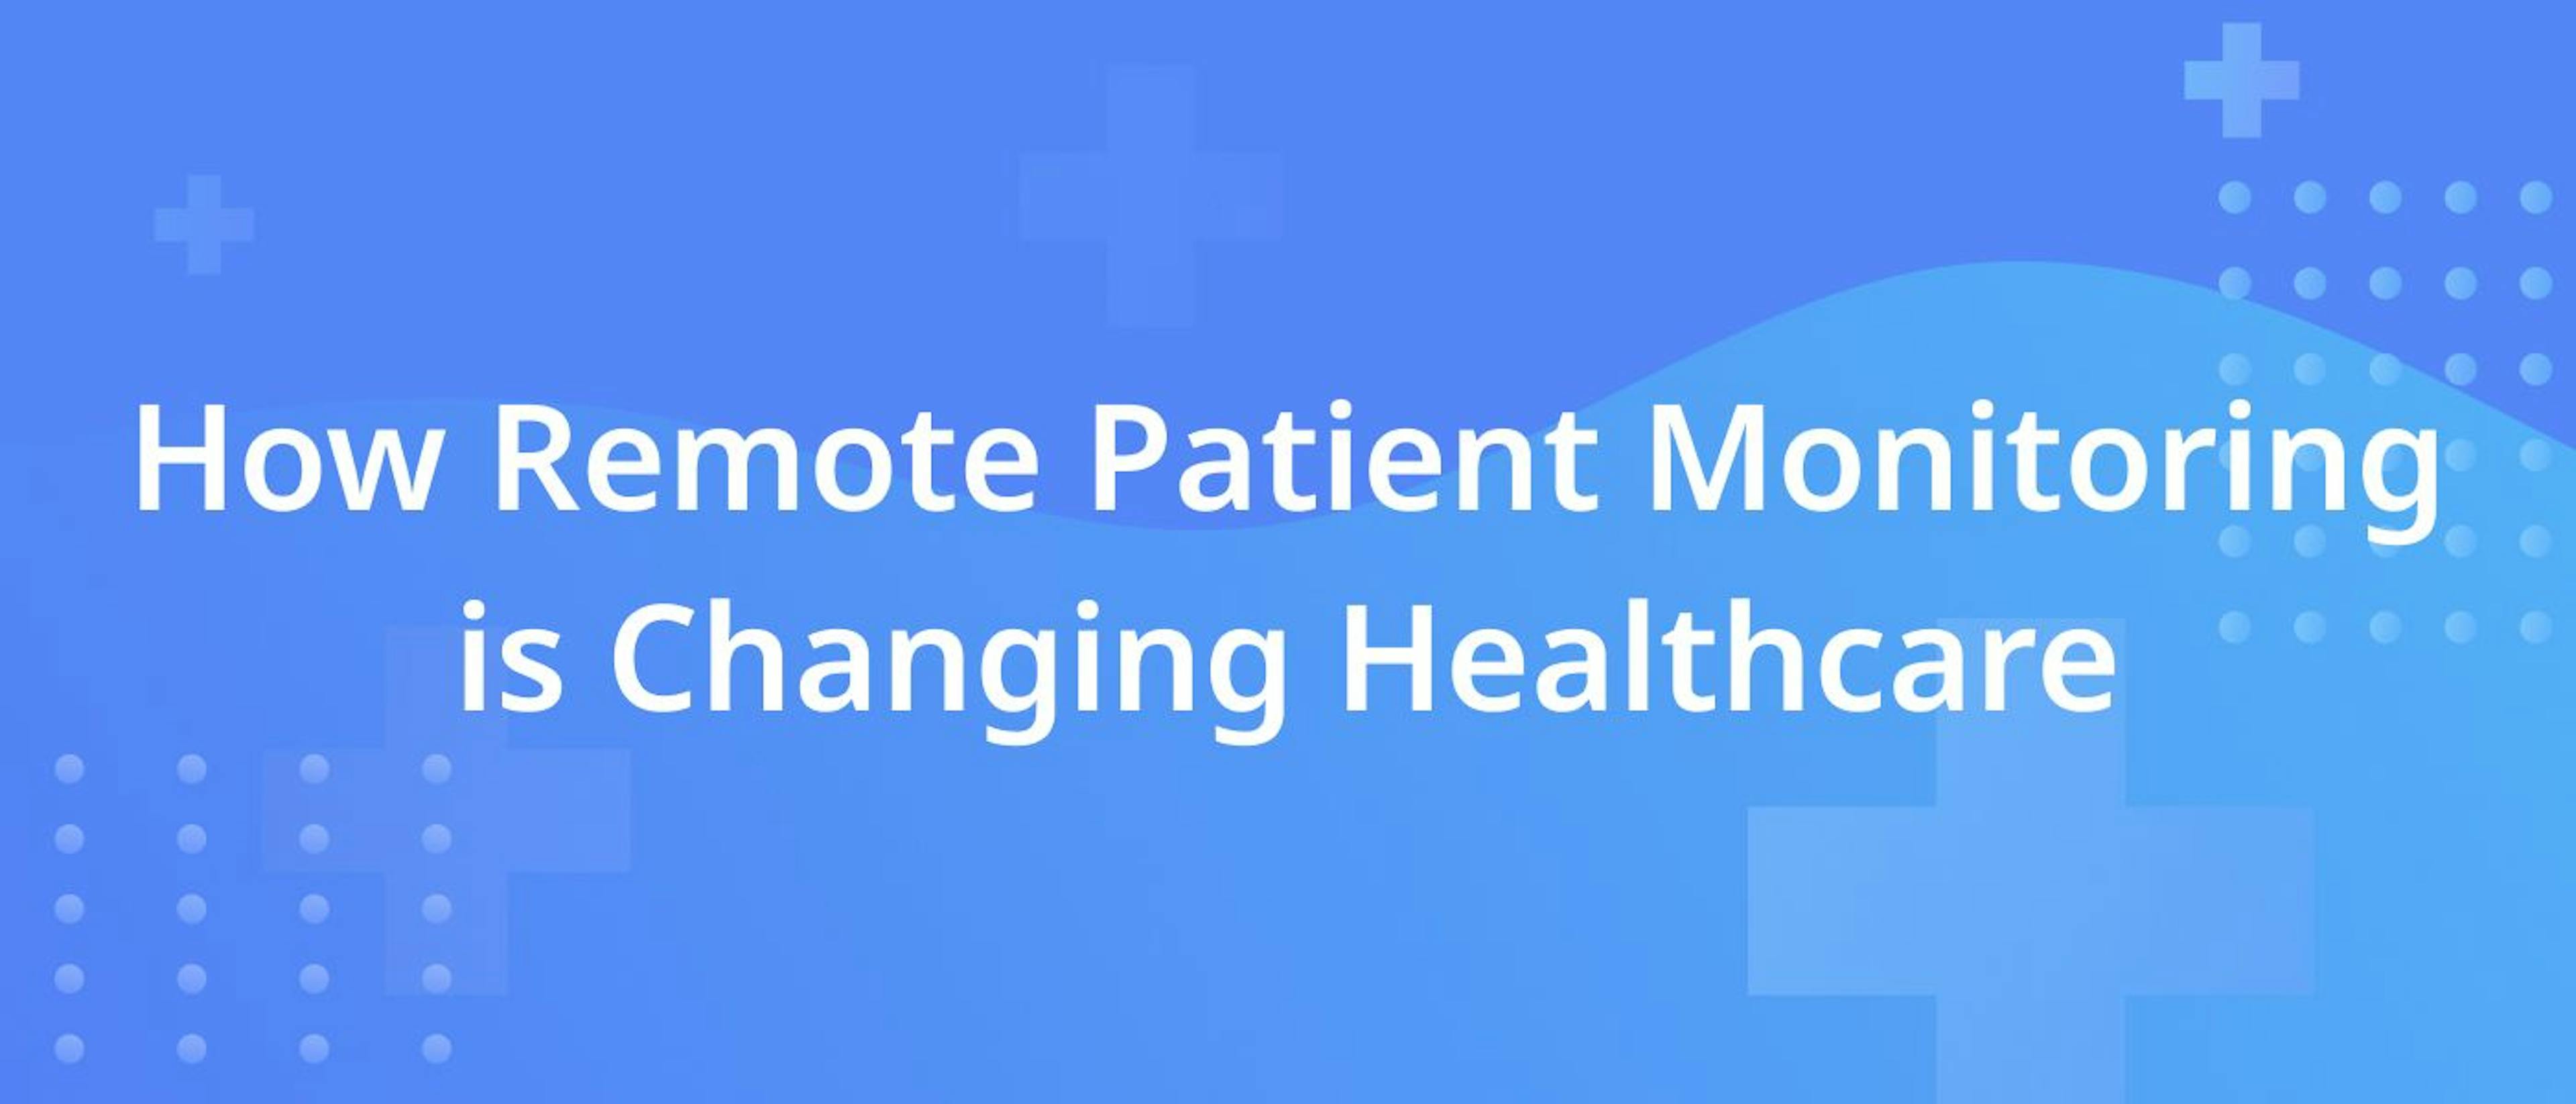 featured image - How Remote Patient Monitoring Technology is Changing Healthcare